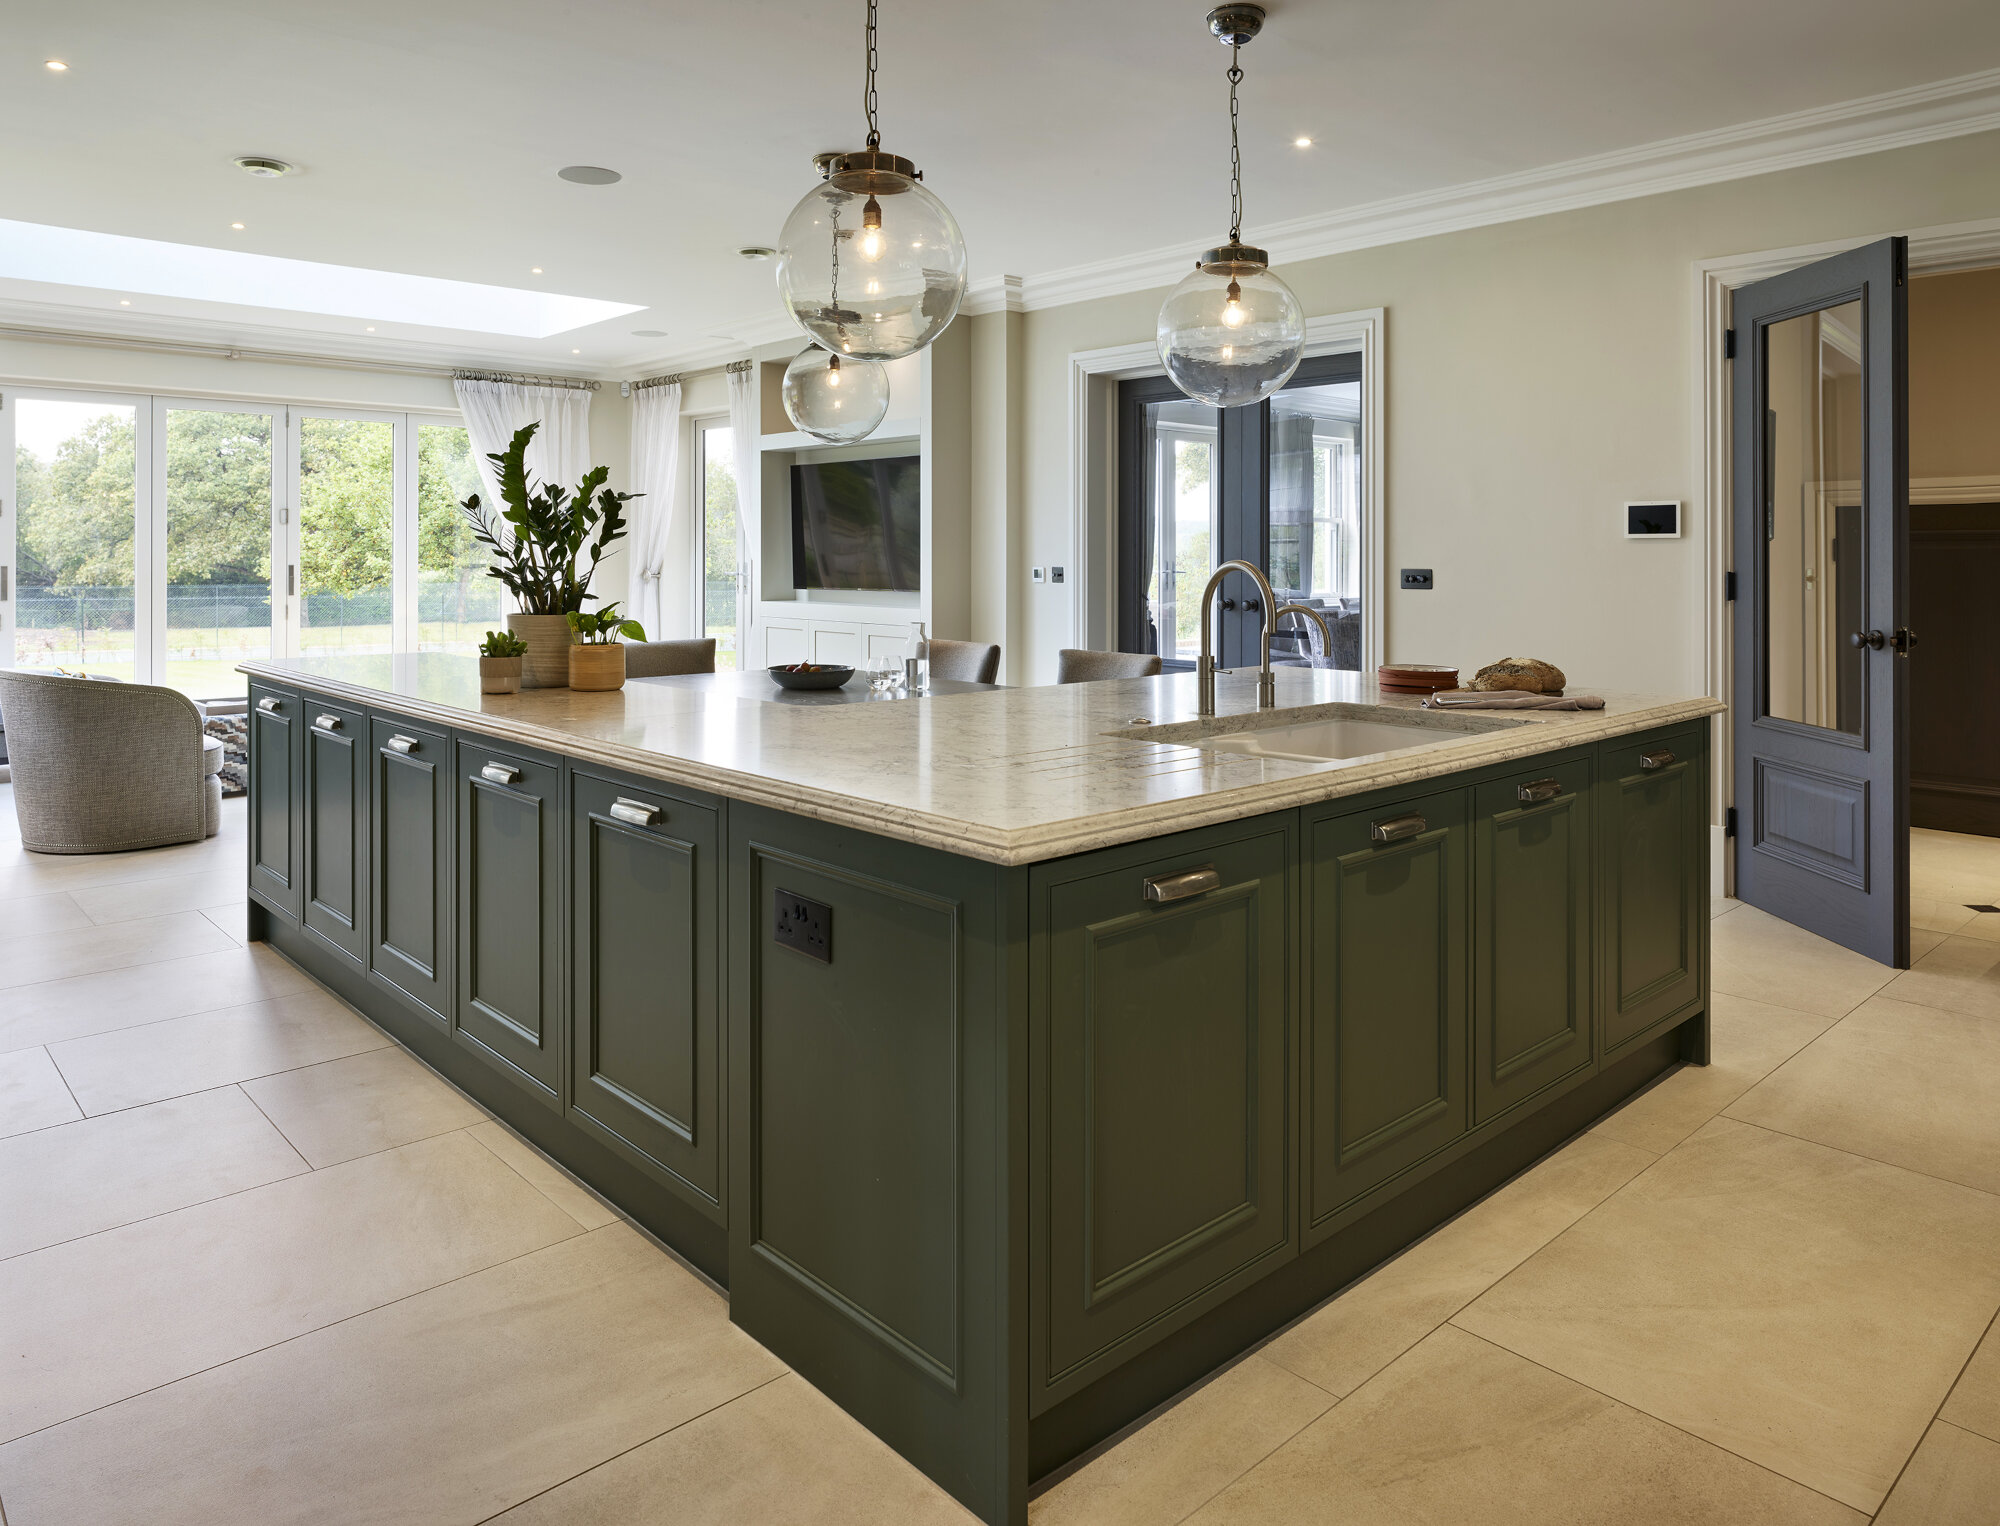 High End traditional Kitchens In Lincoln